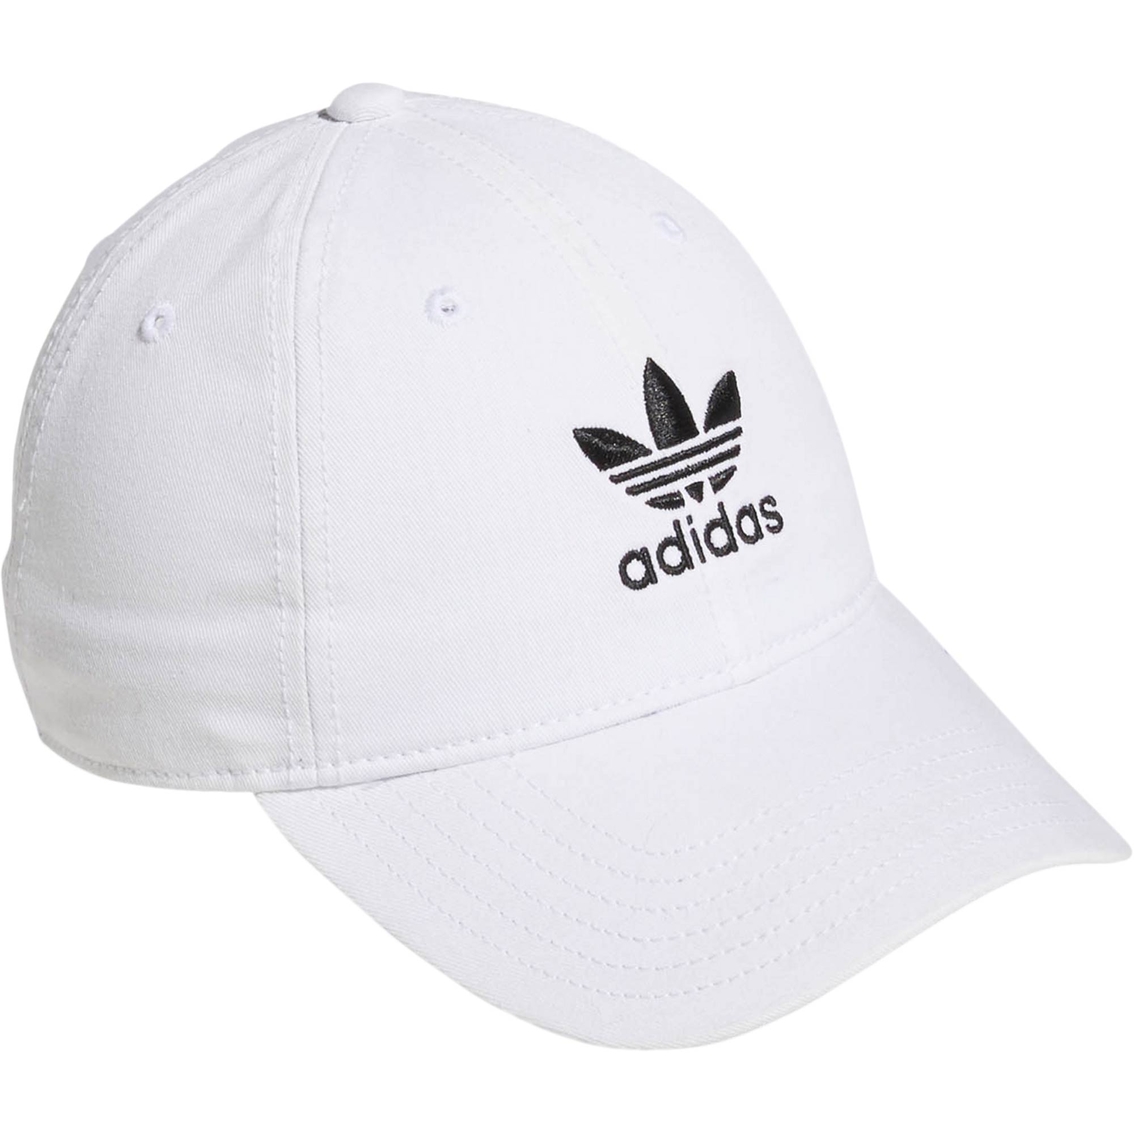 Adidas Originals Relaxed Strap Back Hat - Image 2 of 7